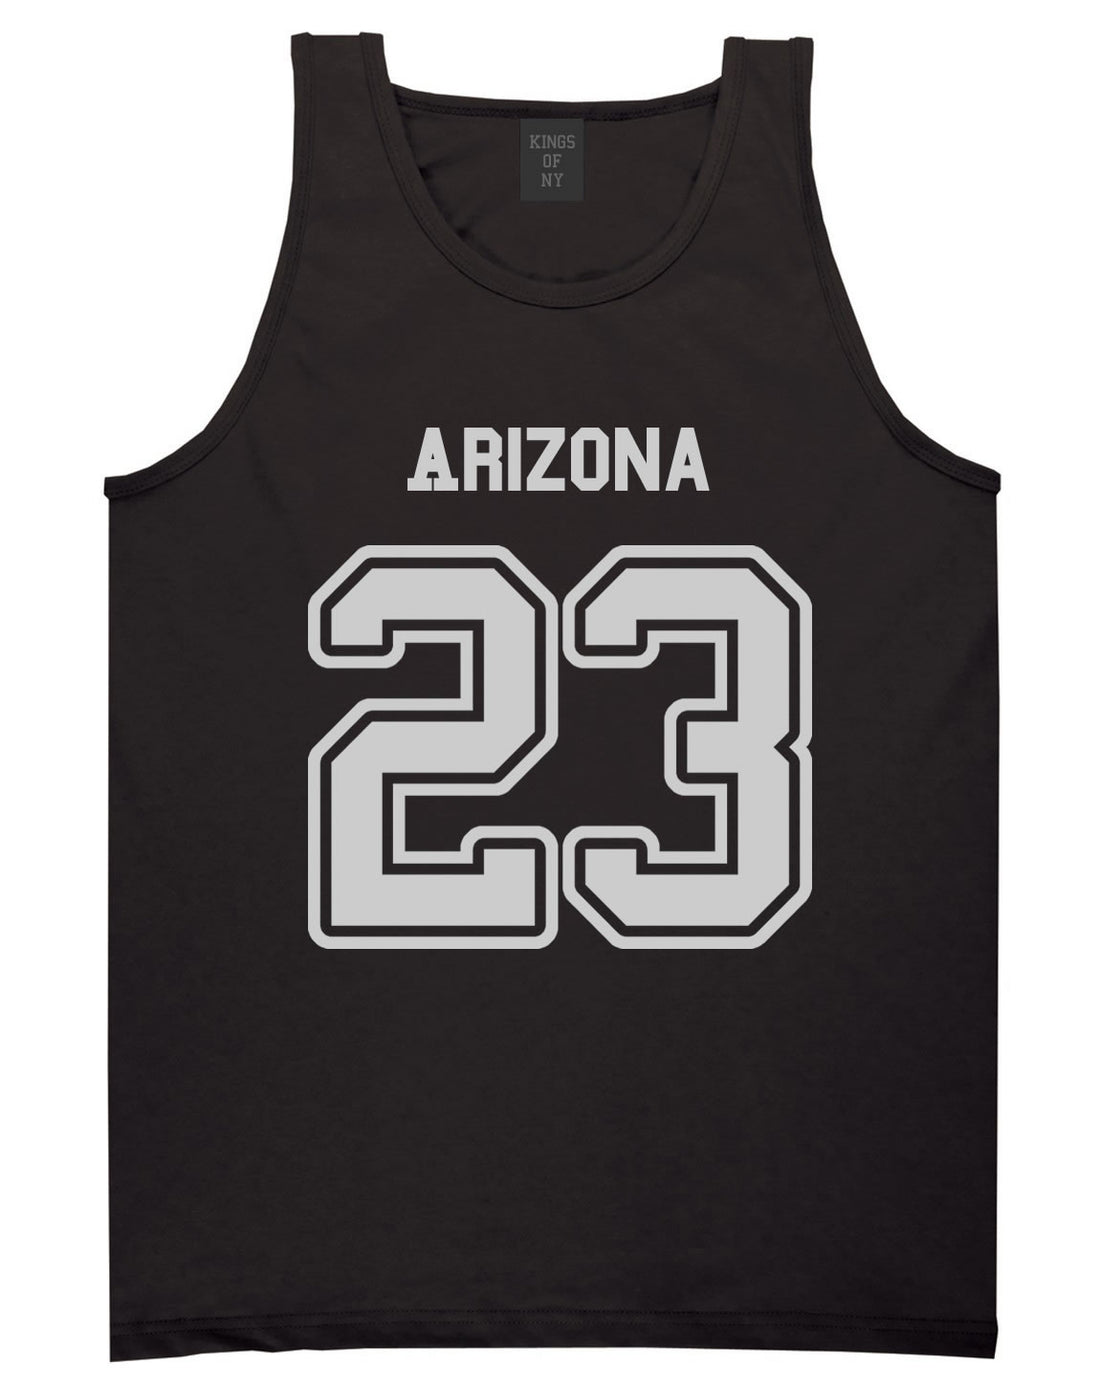 Sport Style Arizona 23 Team State Jersey Mens Tank Top By Kings Of NY